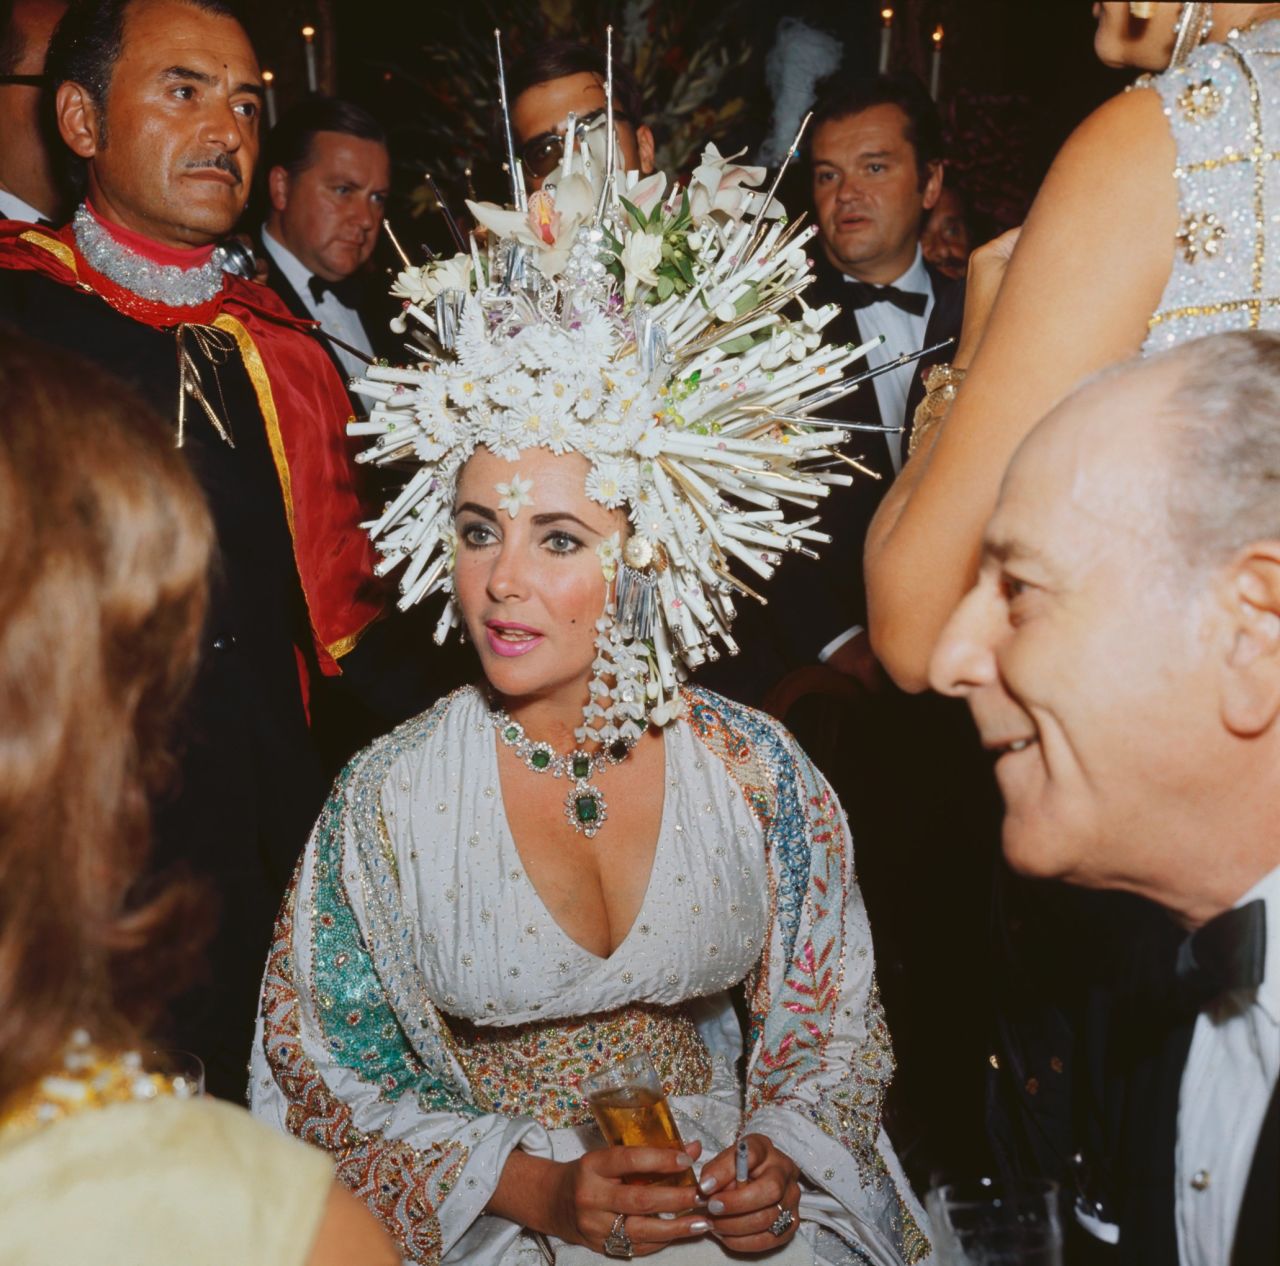 Elizabeth Taylor was famous for wearing flamboyant jewelry, and her collection featured some extremely valuable pieces. Here she is wearing an elaborate headdress of pearls and fake flowers, but her emerald necklace still stands out.